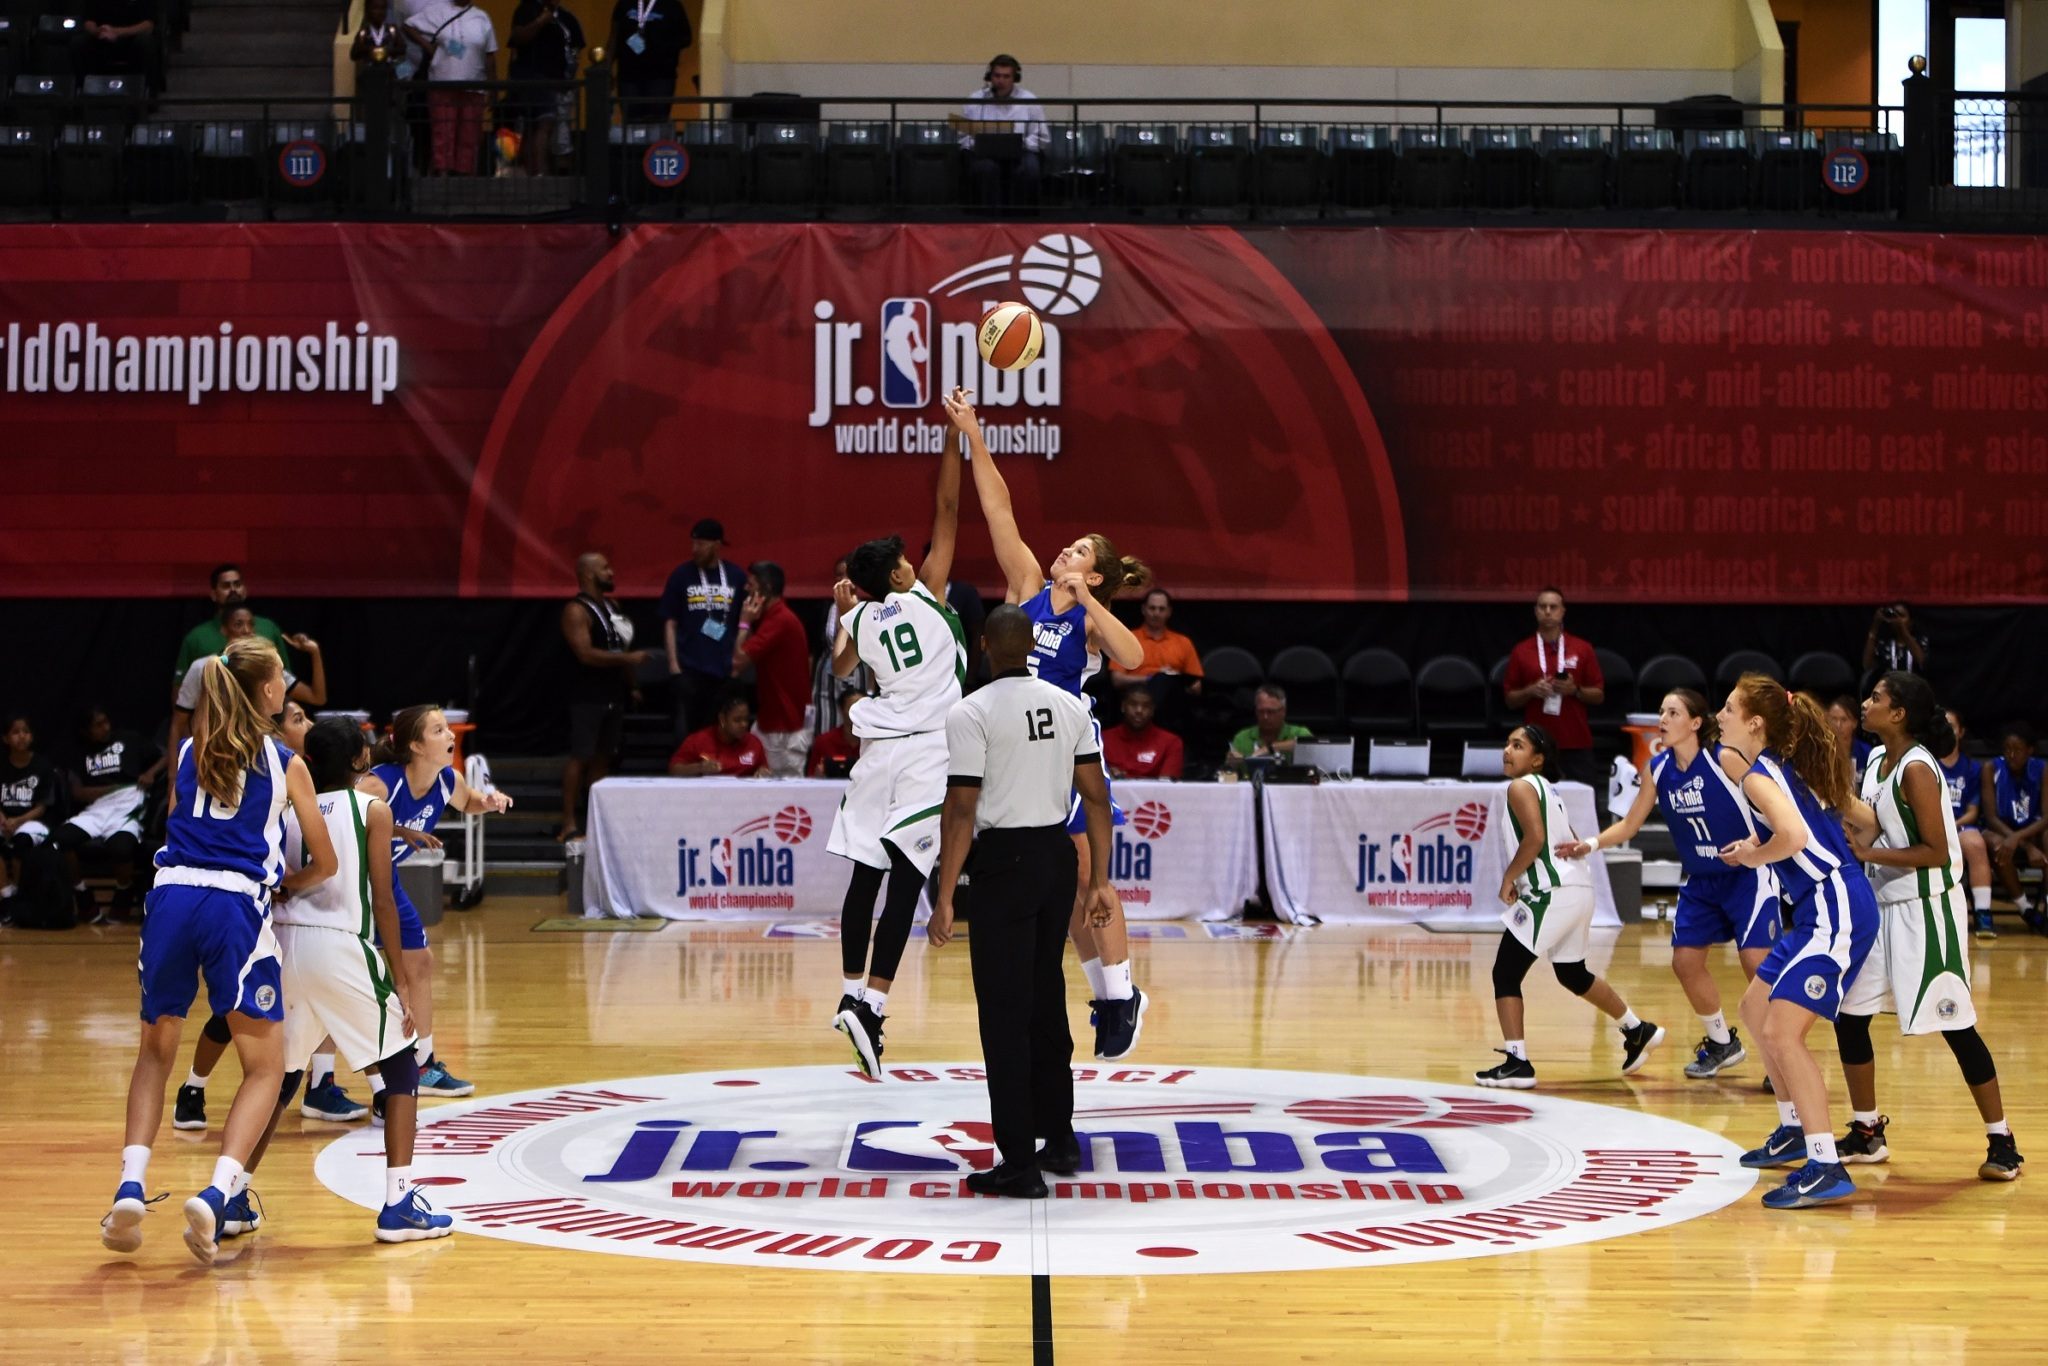 NBA will organize a selection camp for the Junior NBA Global Championship